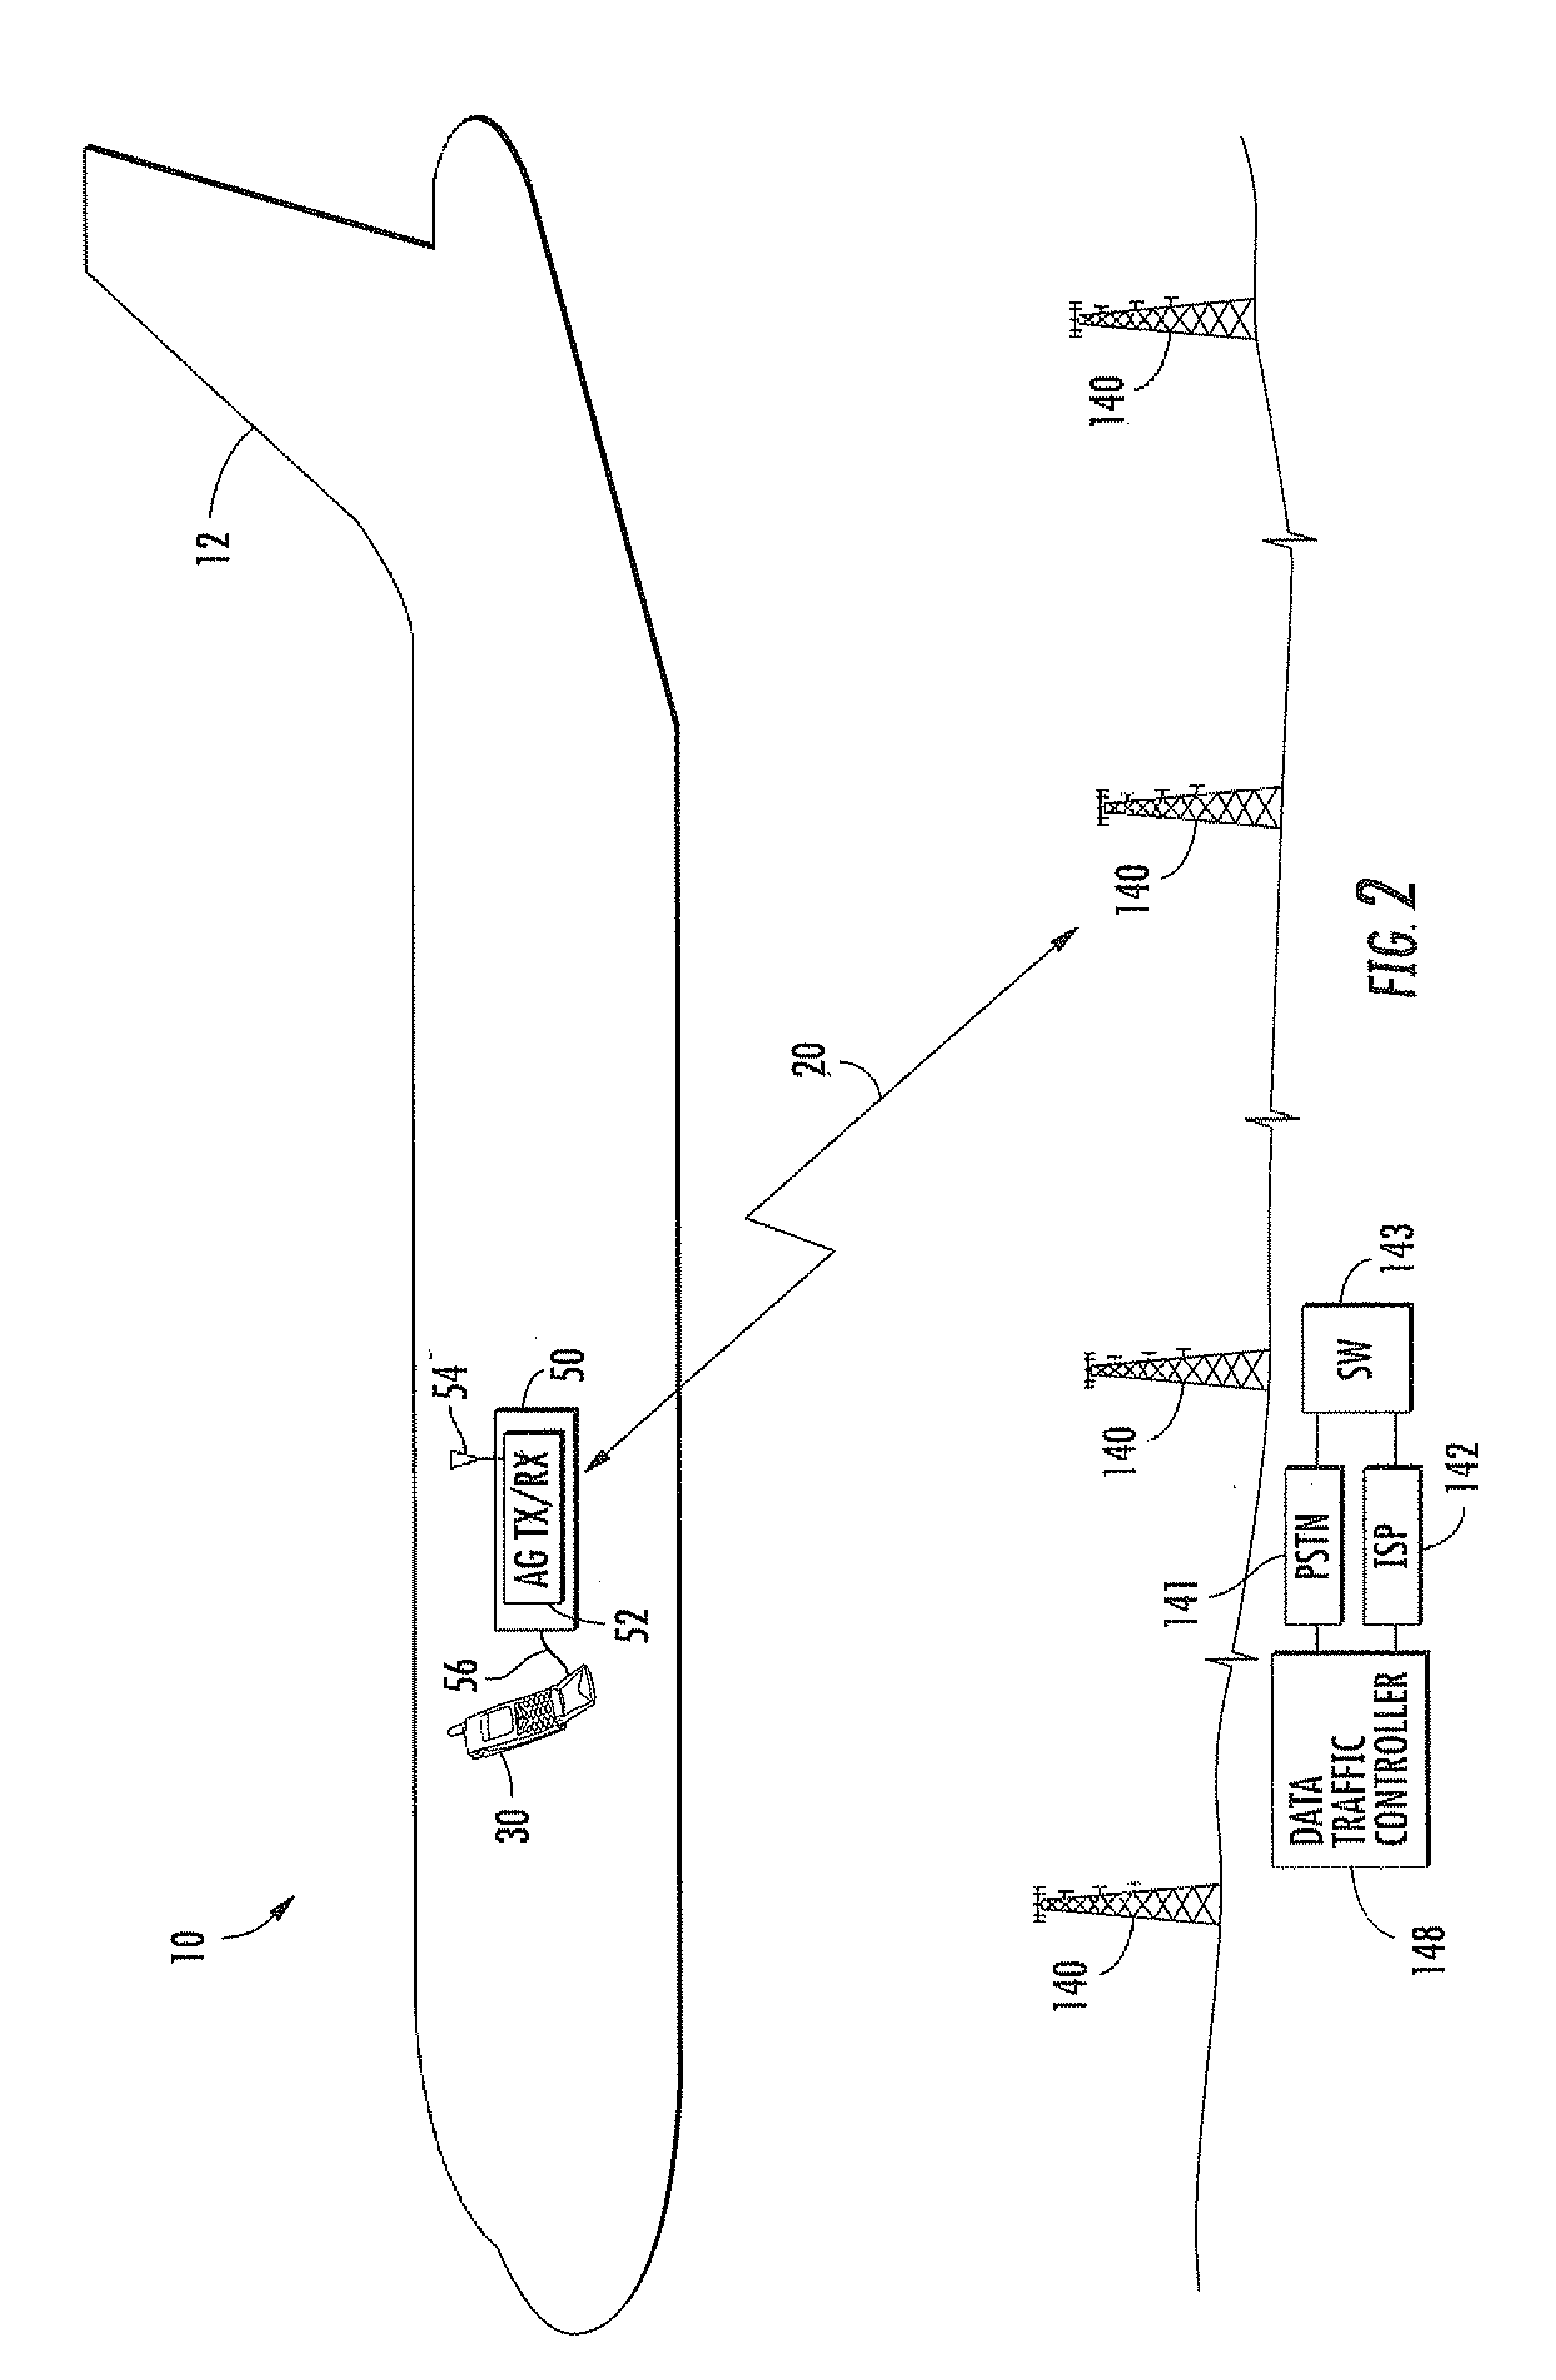 Communications interface device for personal electronic devices (PEDS) operating on a general aviation aircraft and associated methods